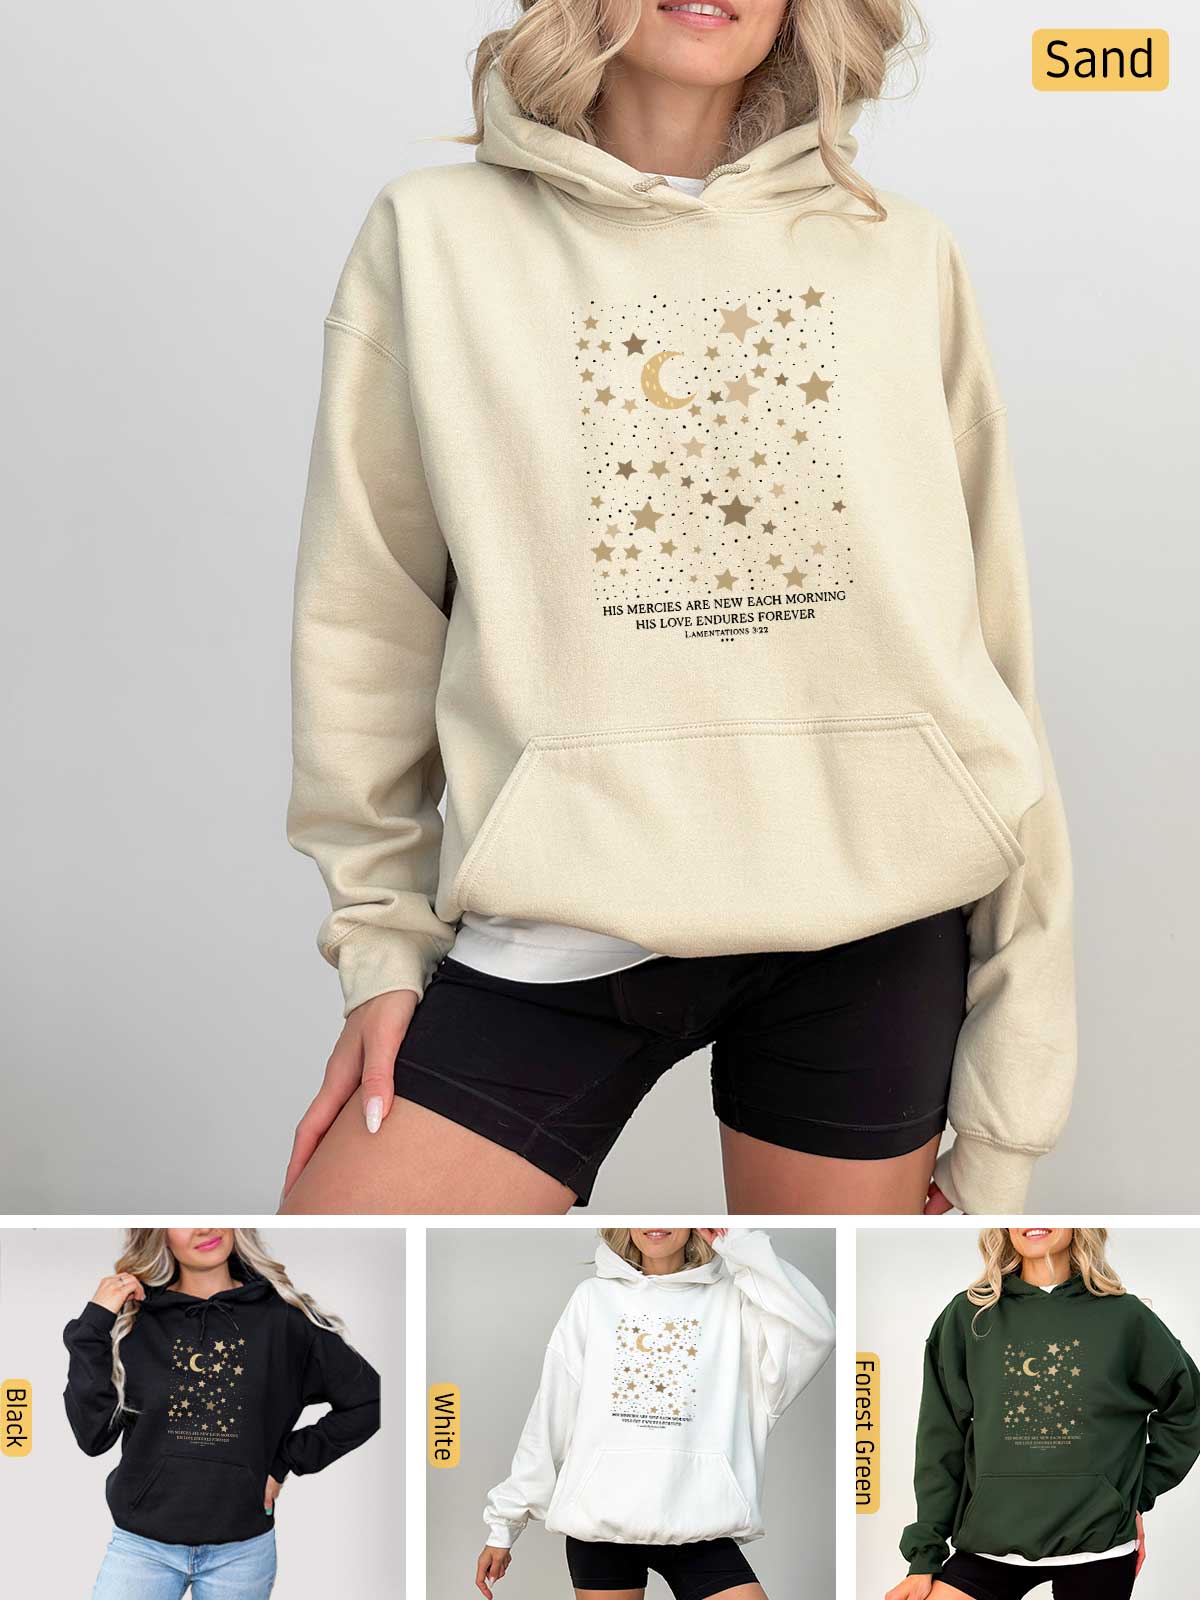 a woman wearing a sweatshirt with stars and moon on it